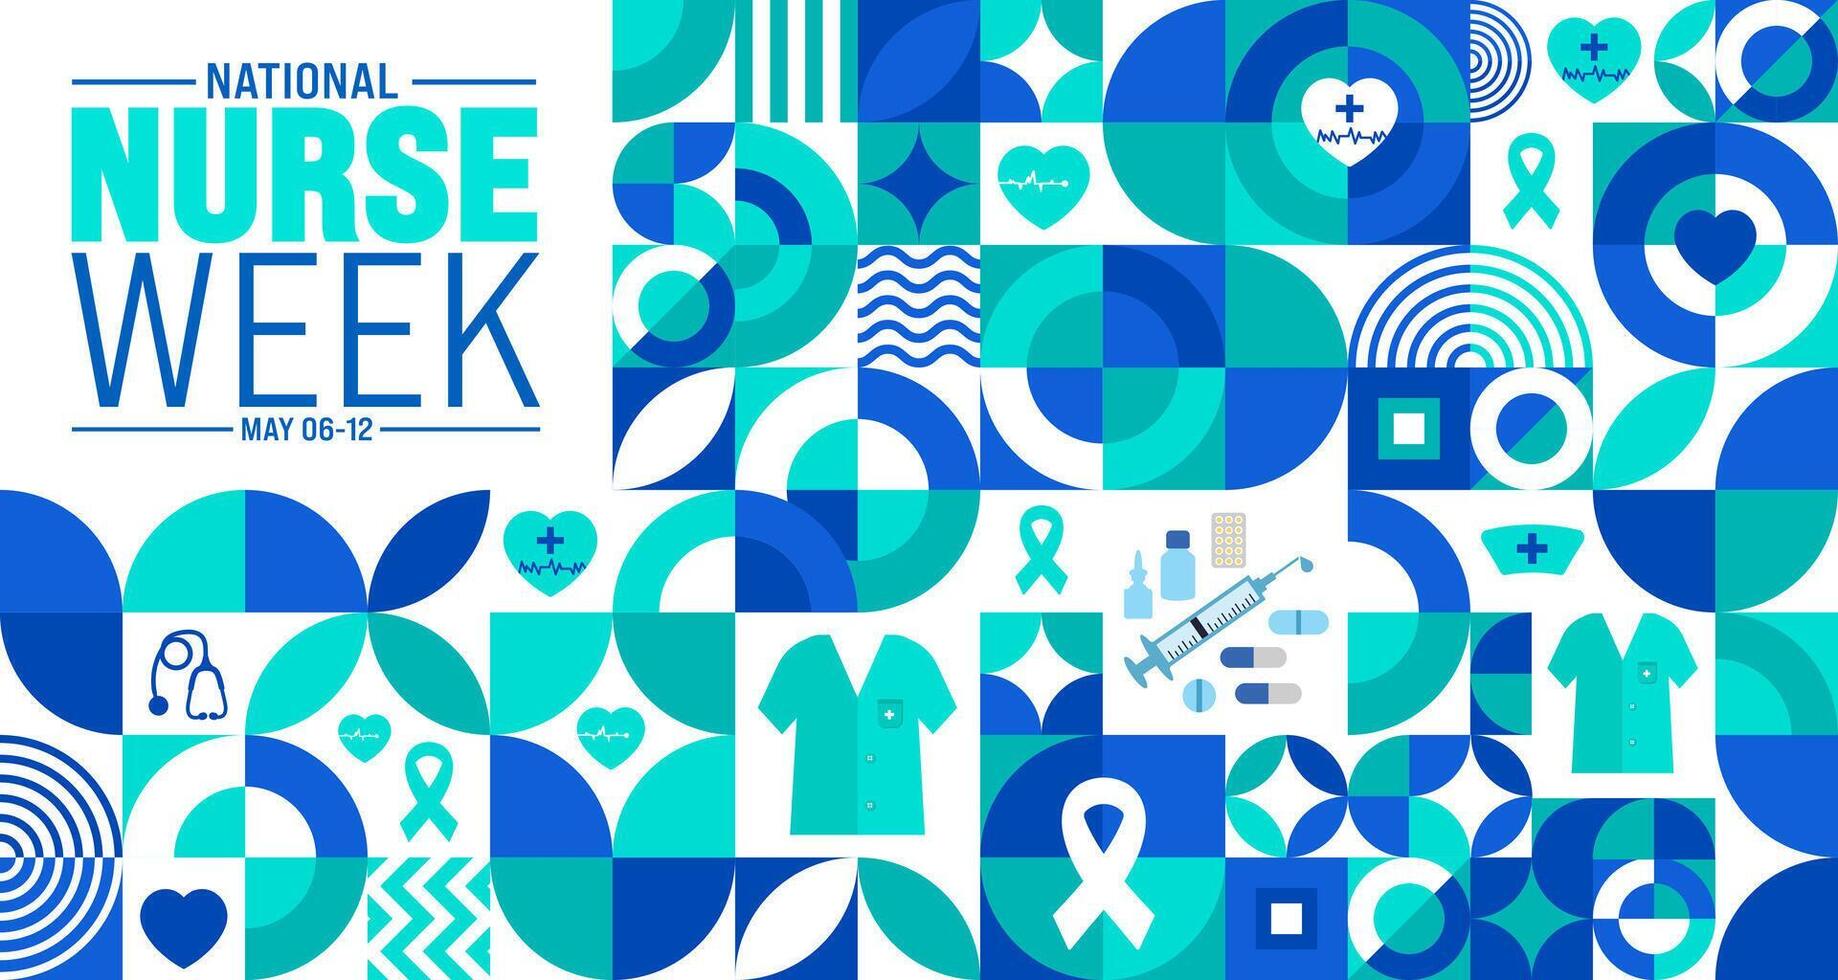 6th to 12th May is National nurses week background with geometric shape pattern template. Medical and health care concept. Celebrated annually in United States. Thank you nurses or honour of the nurse vector